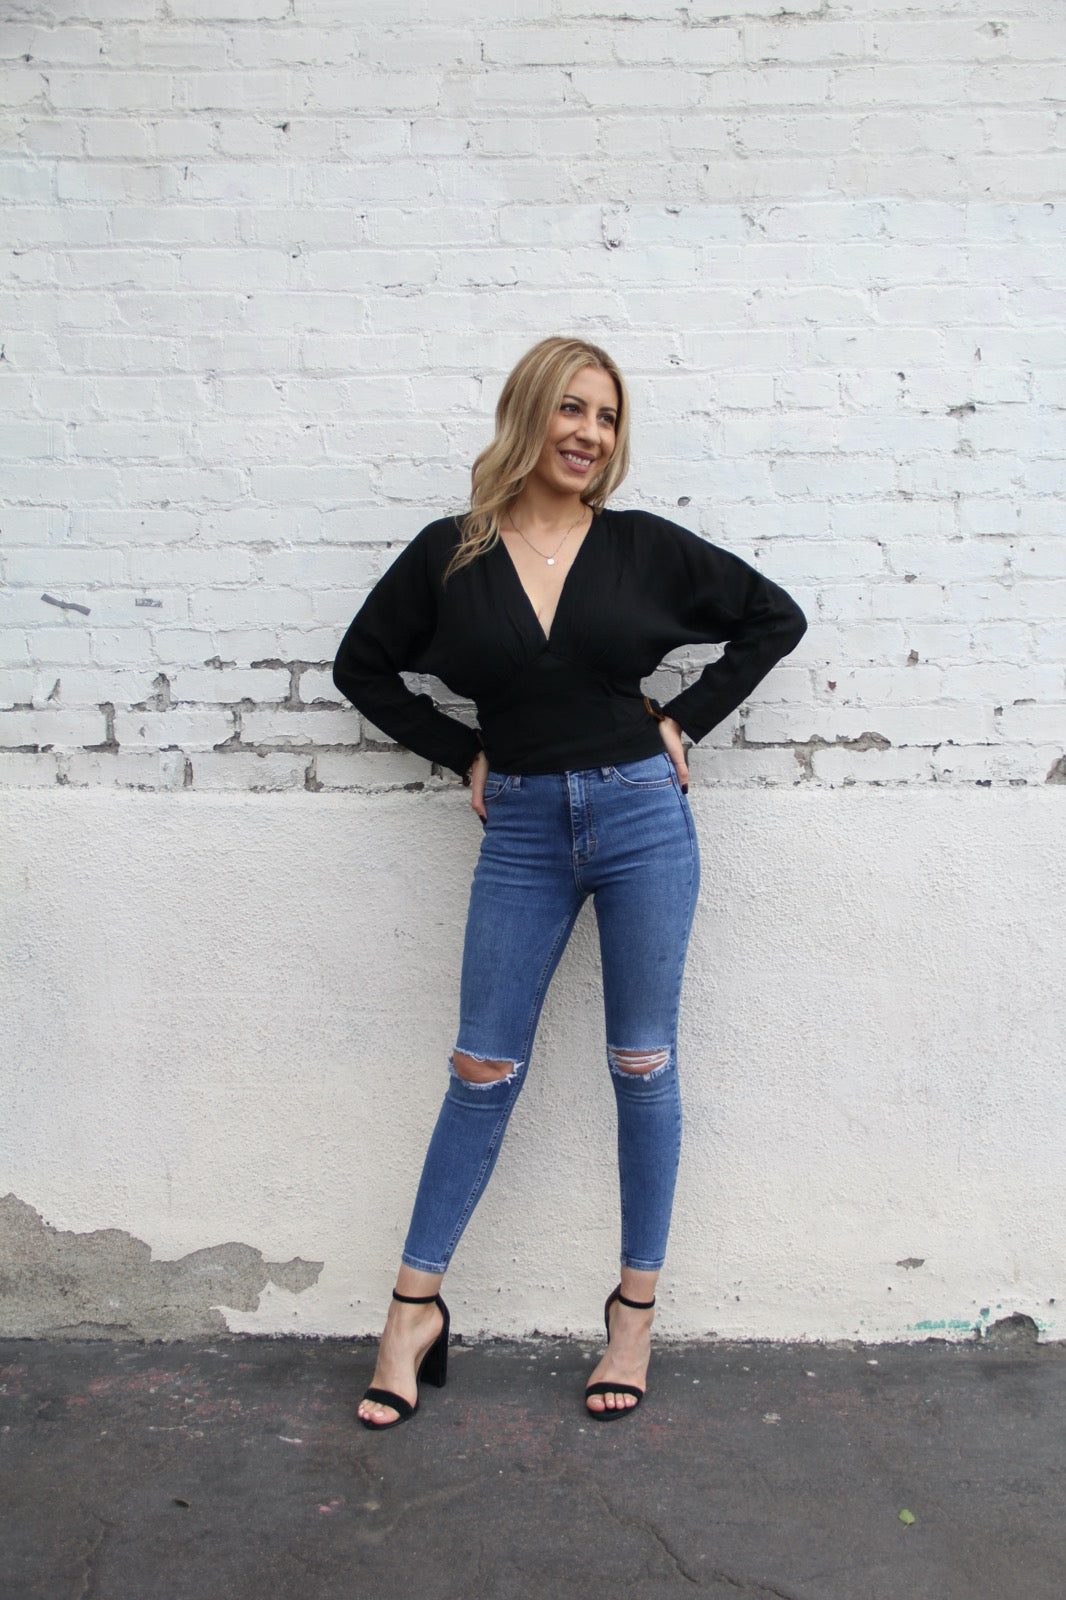 Shop our selection of women's black long sleeve tops for an everyday to night look. Smocked Back detail. Shop the latest arrivals of spring long sleeve tops100% Polyester Marble Buckle Detail V-Neck Smocked Back Black